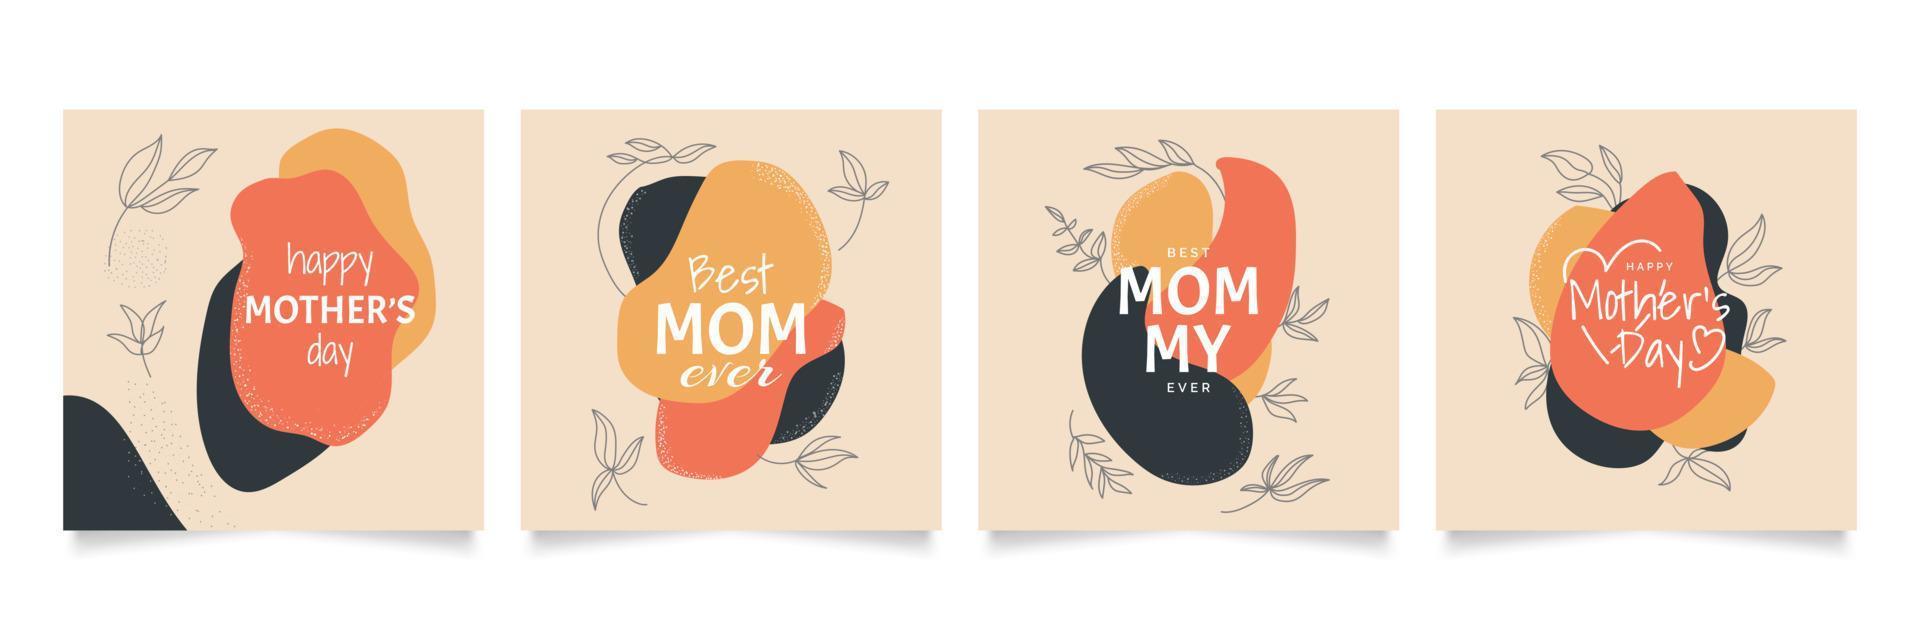 Happy Mother's Day Typography for Greeting Card or Poster Design with Flower Illustration vector